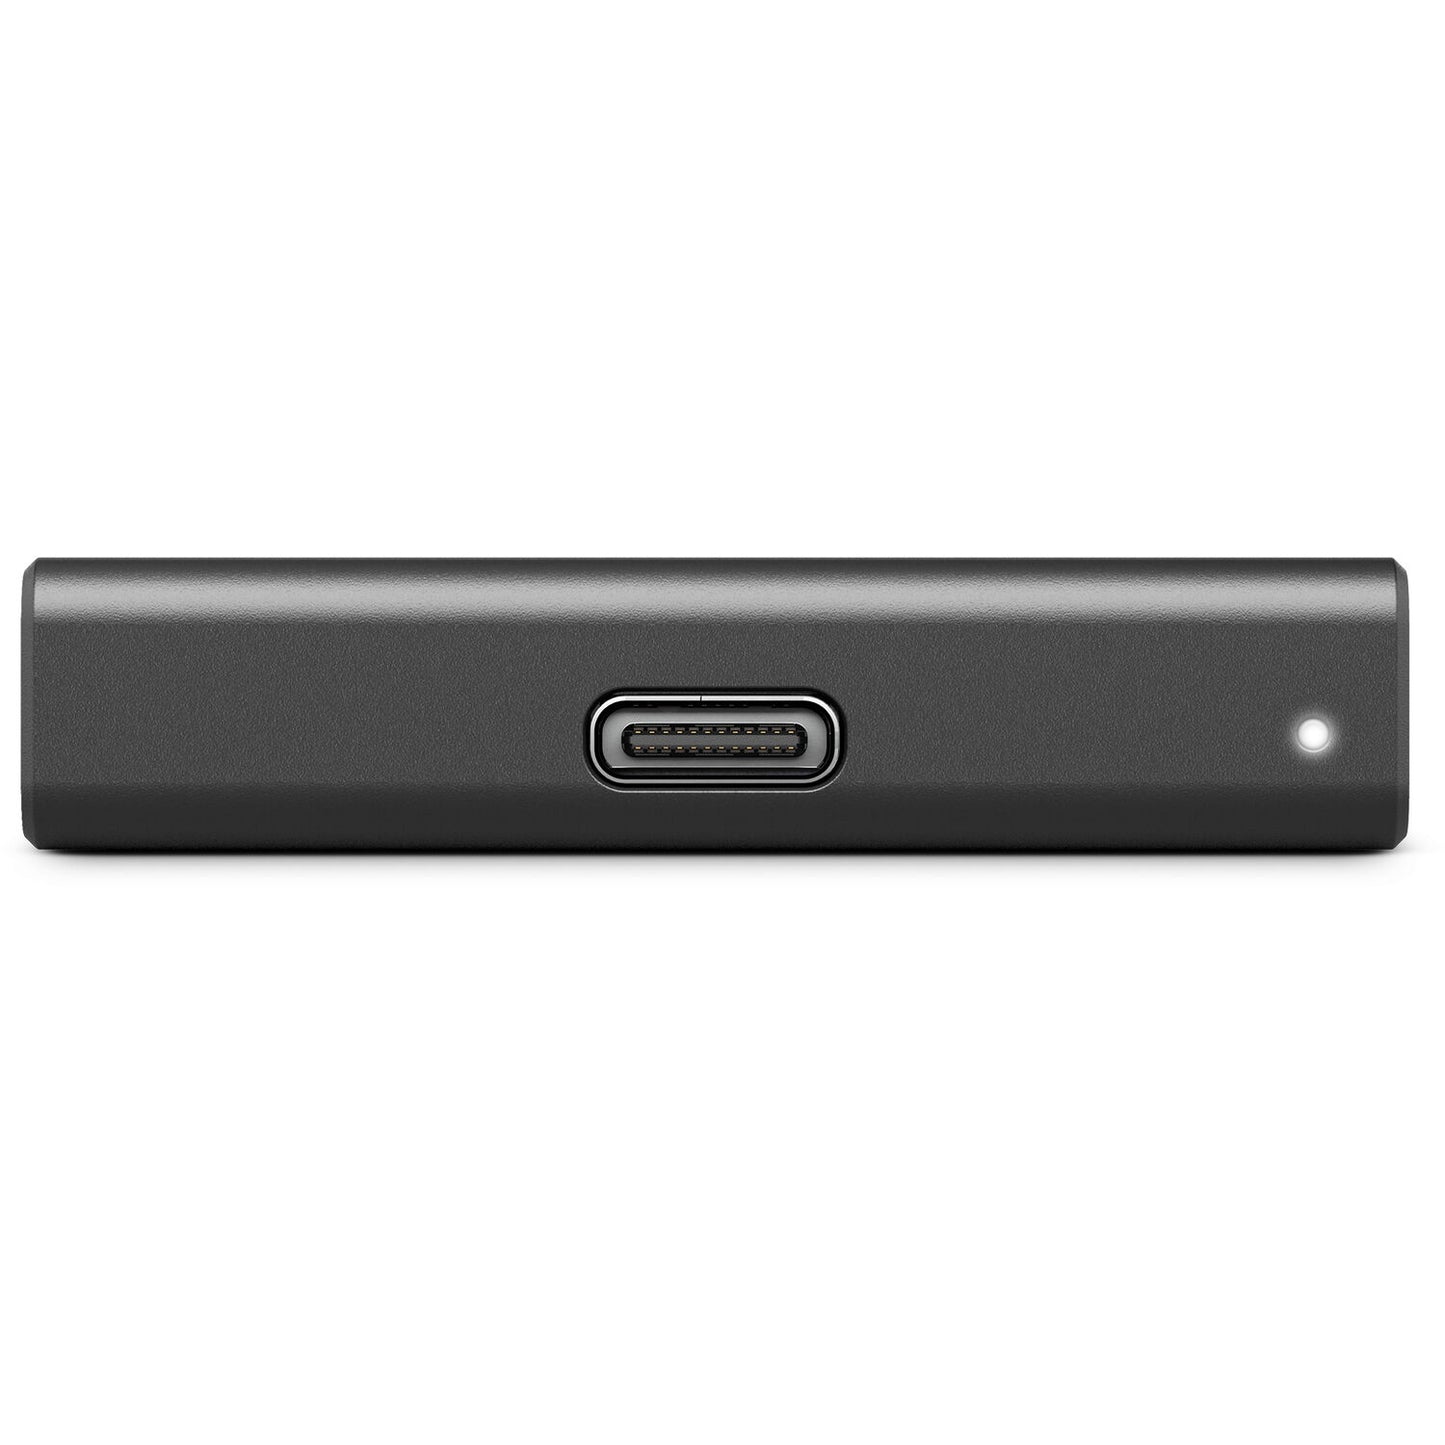 Seagate One Touch SSD External Hard Drive - 1TB - Black (USB-C 3.1 only)